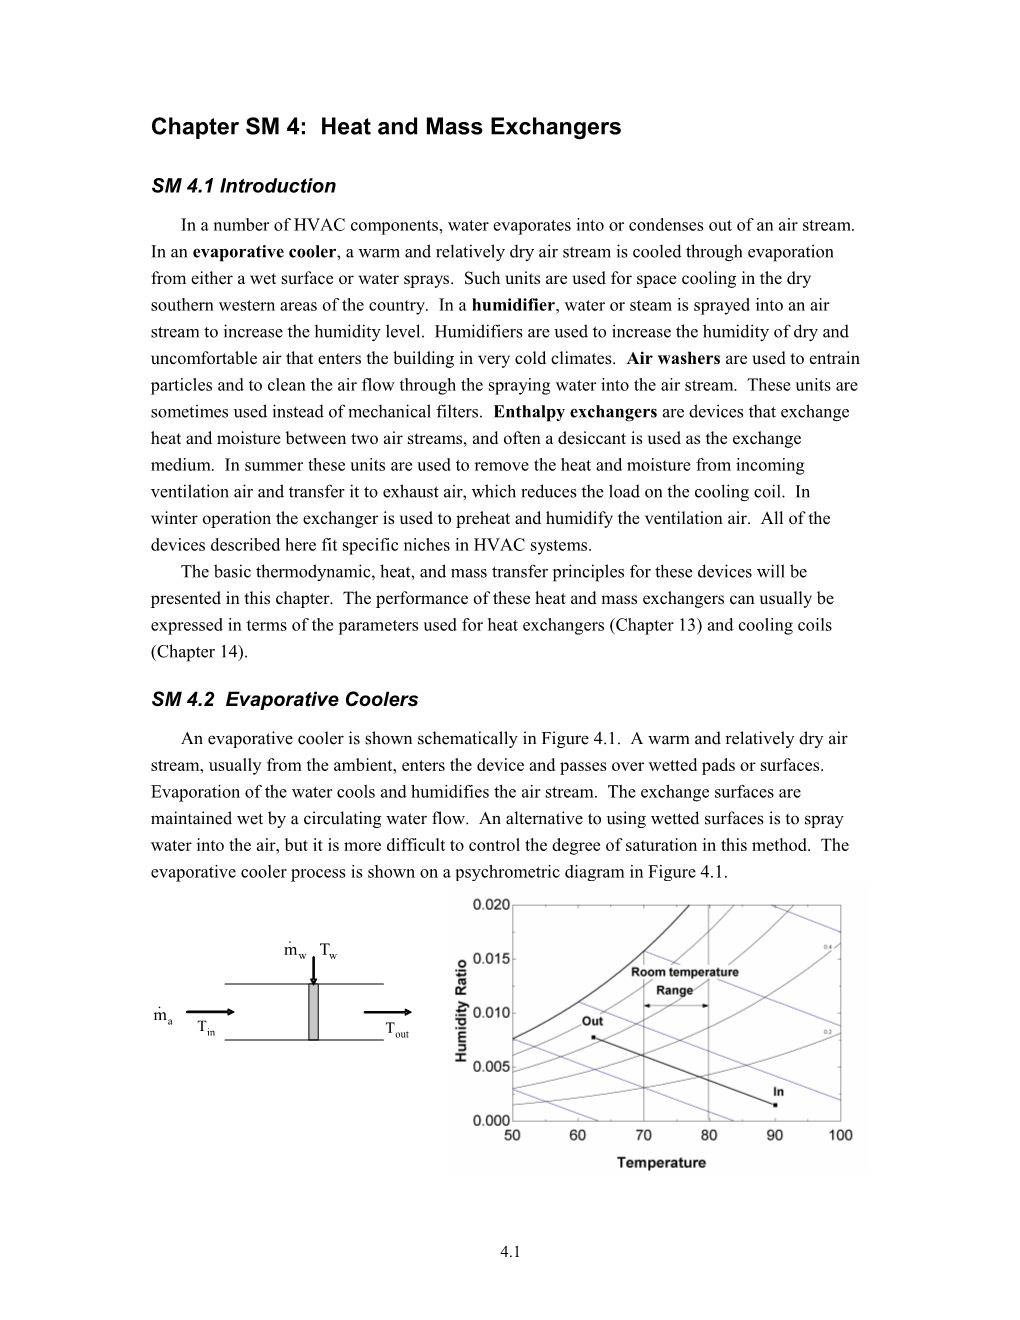 Chapter SM 4: Heat and Mass Exchangers